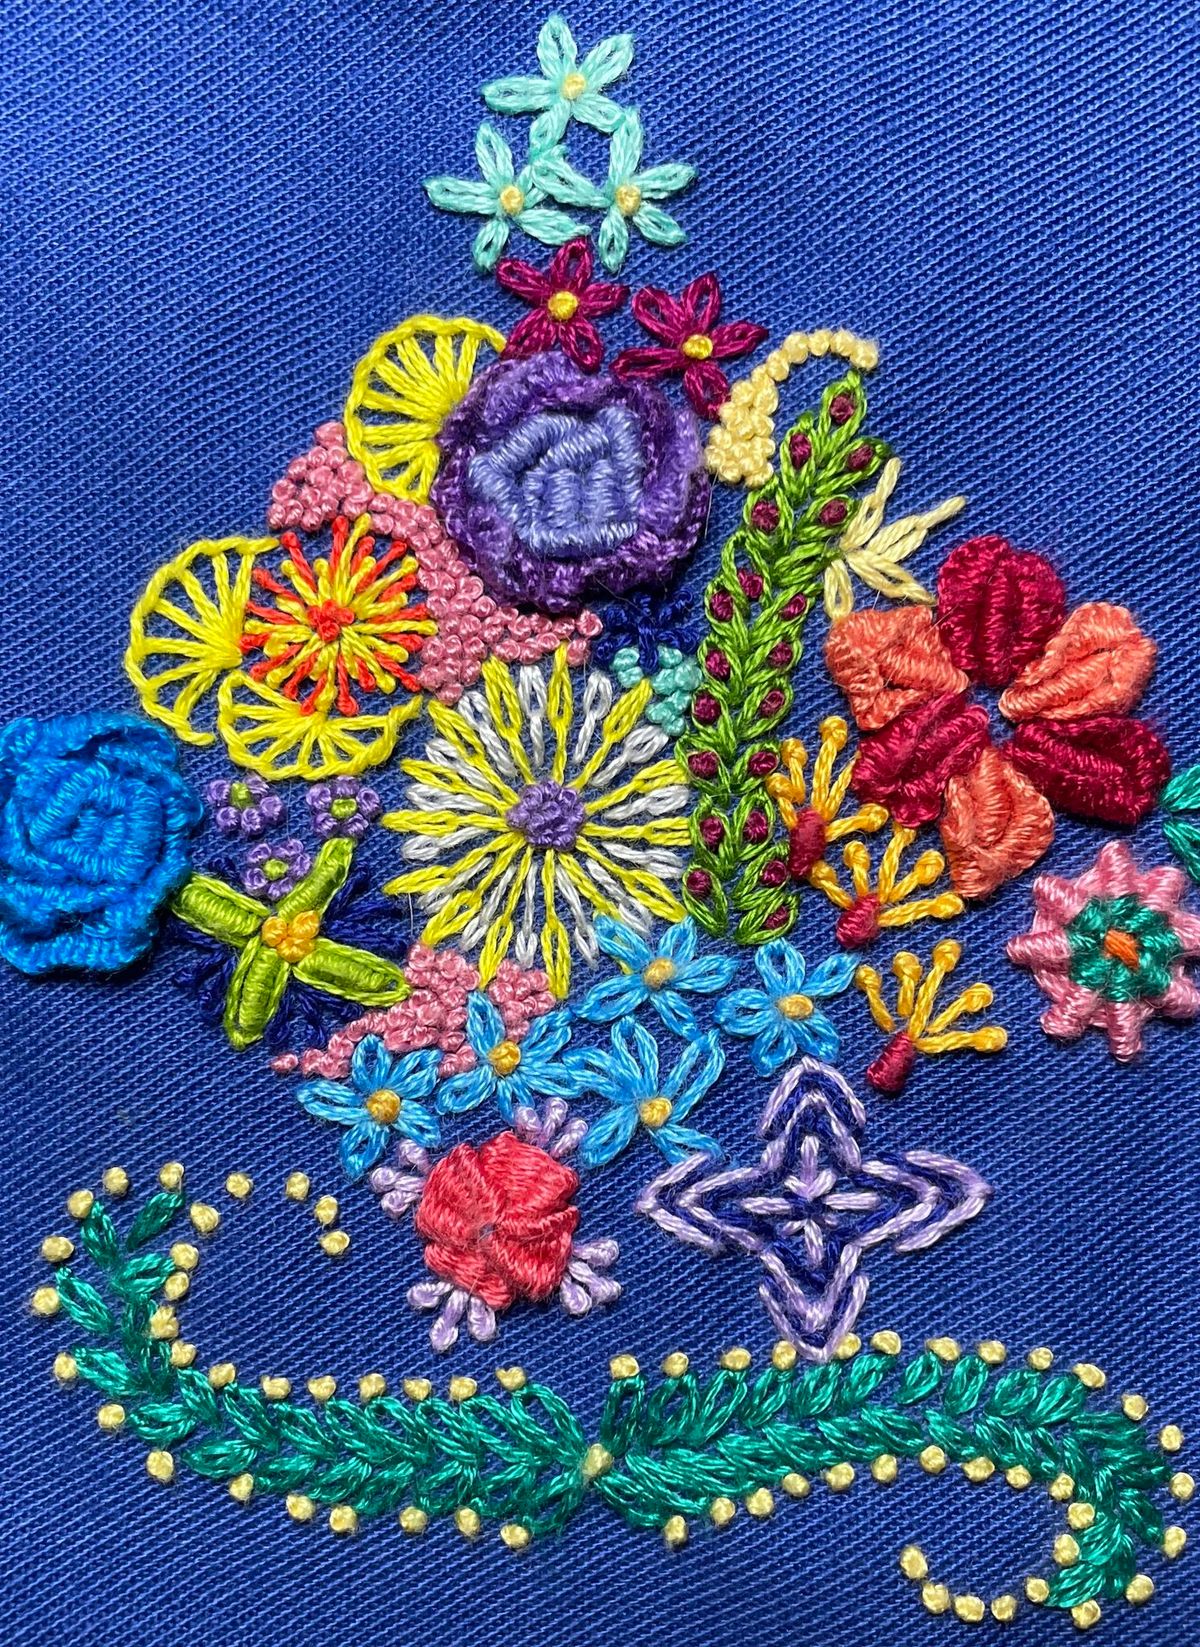 An Embroidery Workshop: Freestyle Flowers with Laura Tandeske